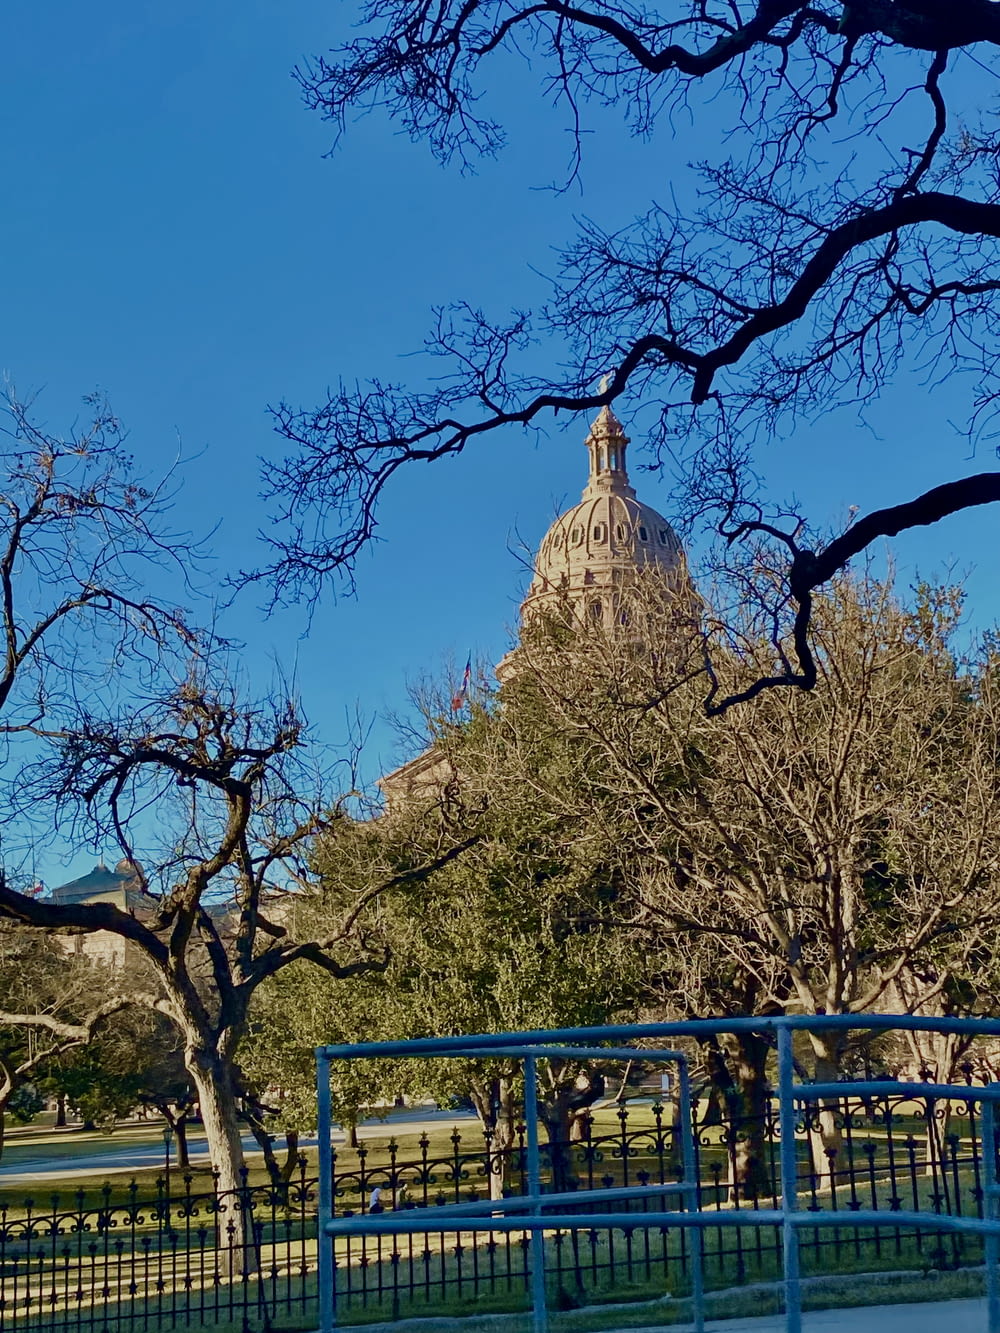 a view of the capitol building from across the park